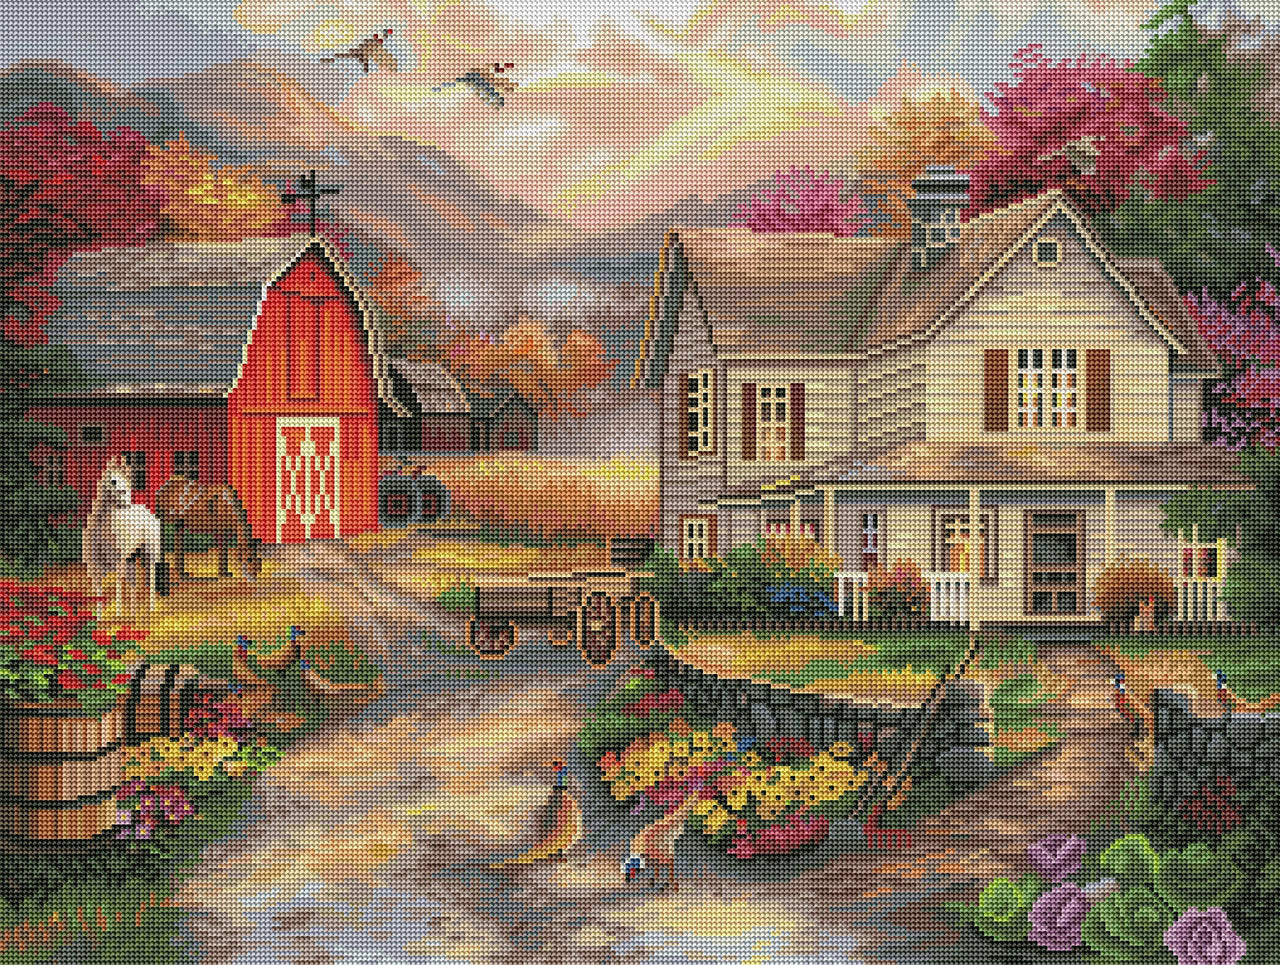 Diamond Painting Relaxing on the Farm 29" x 22″ (74cm x 56cm) / Round with 64 Colors including 4 ABs / 52,536